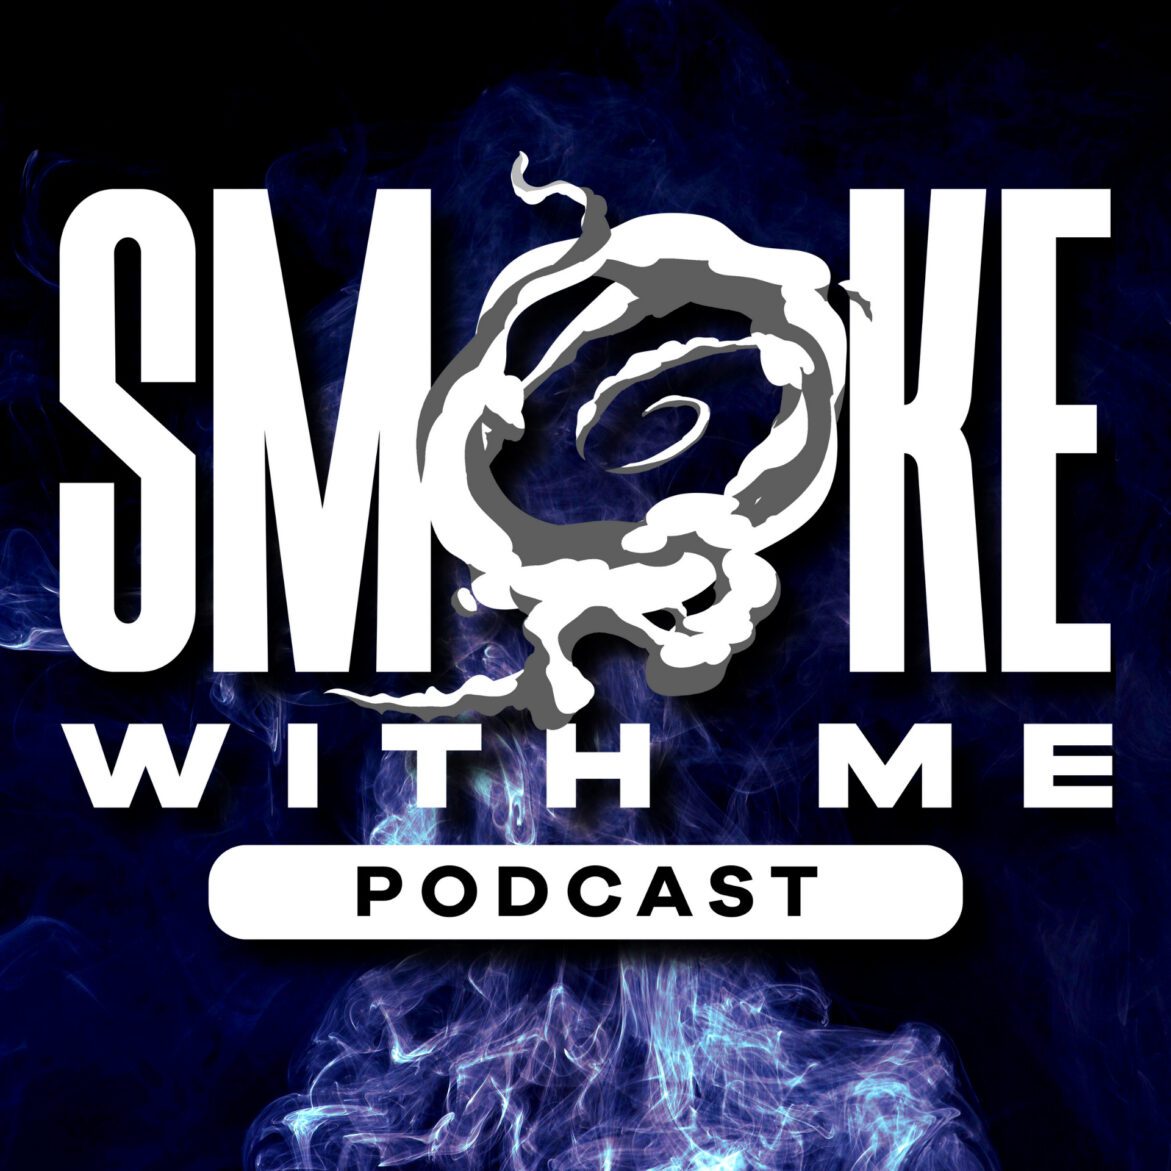 Black Podcasting - Sinister Smoke - Smoke With ME Podcast (episode 14) Sinister Monopoly